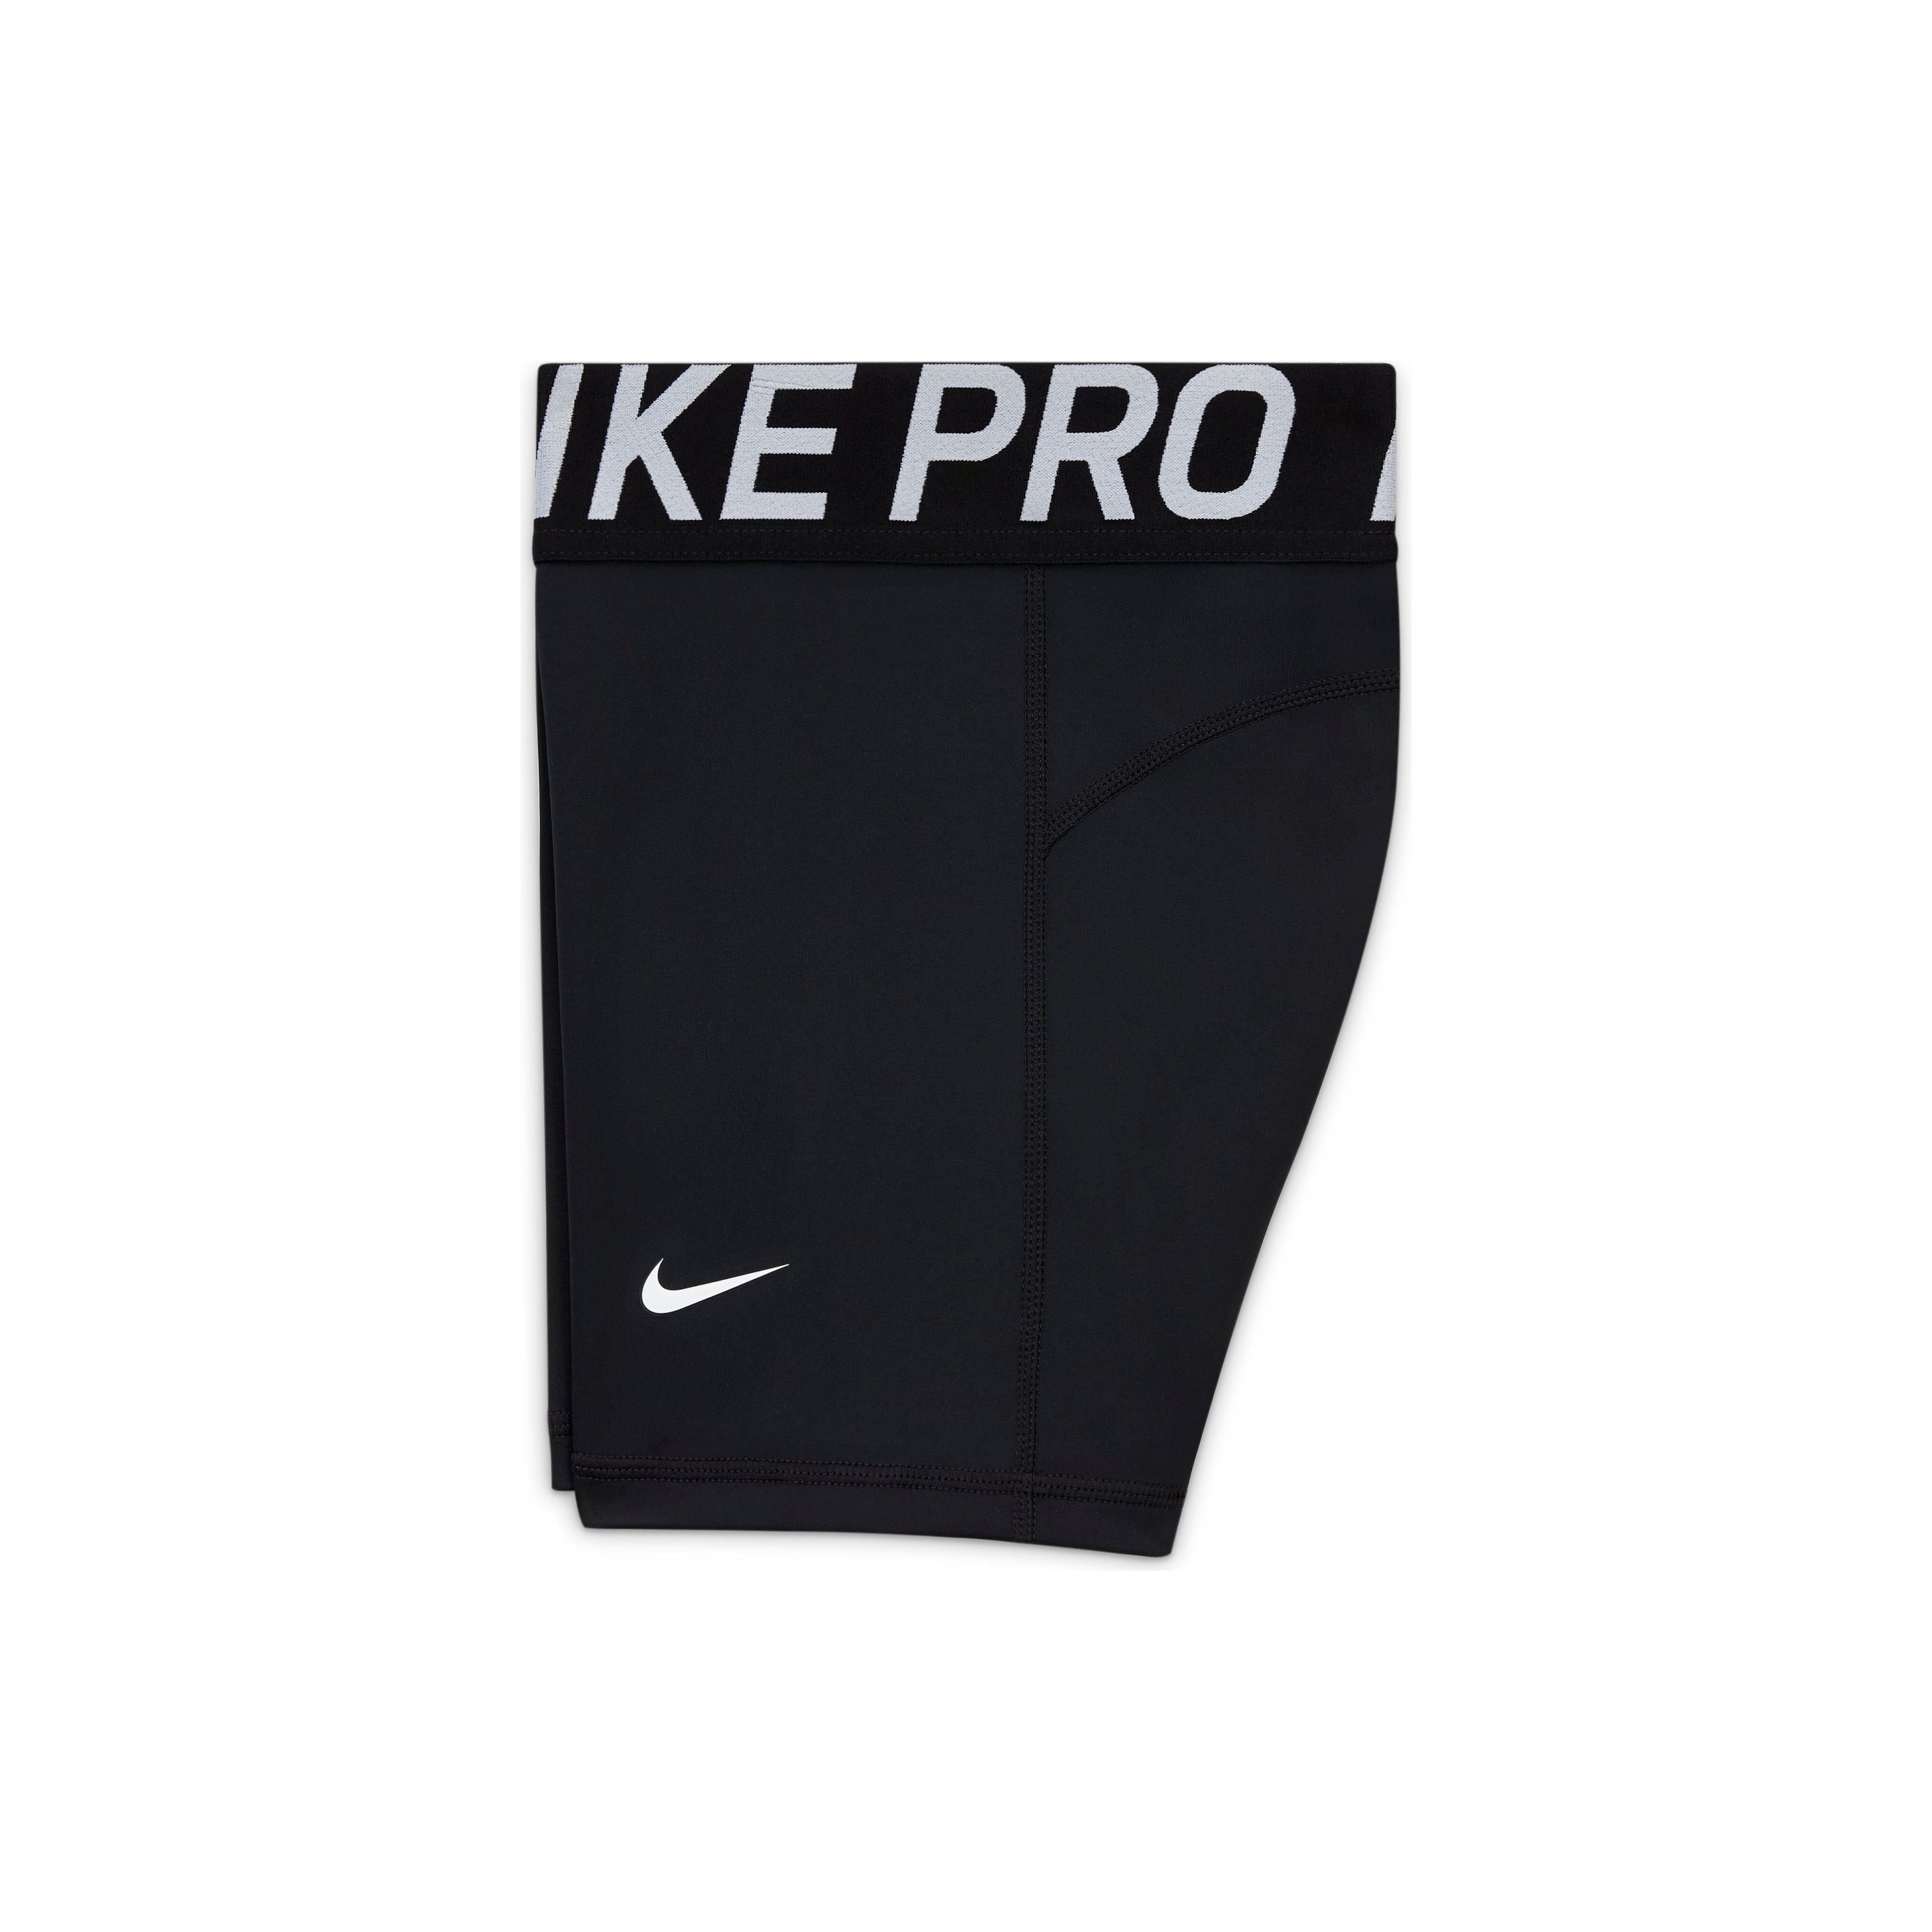 Nike Pro Youth Compression Short - Nike Apparel